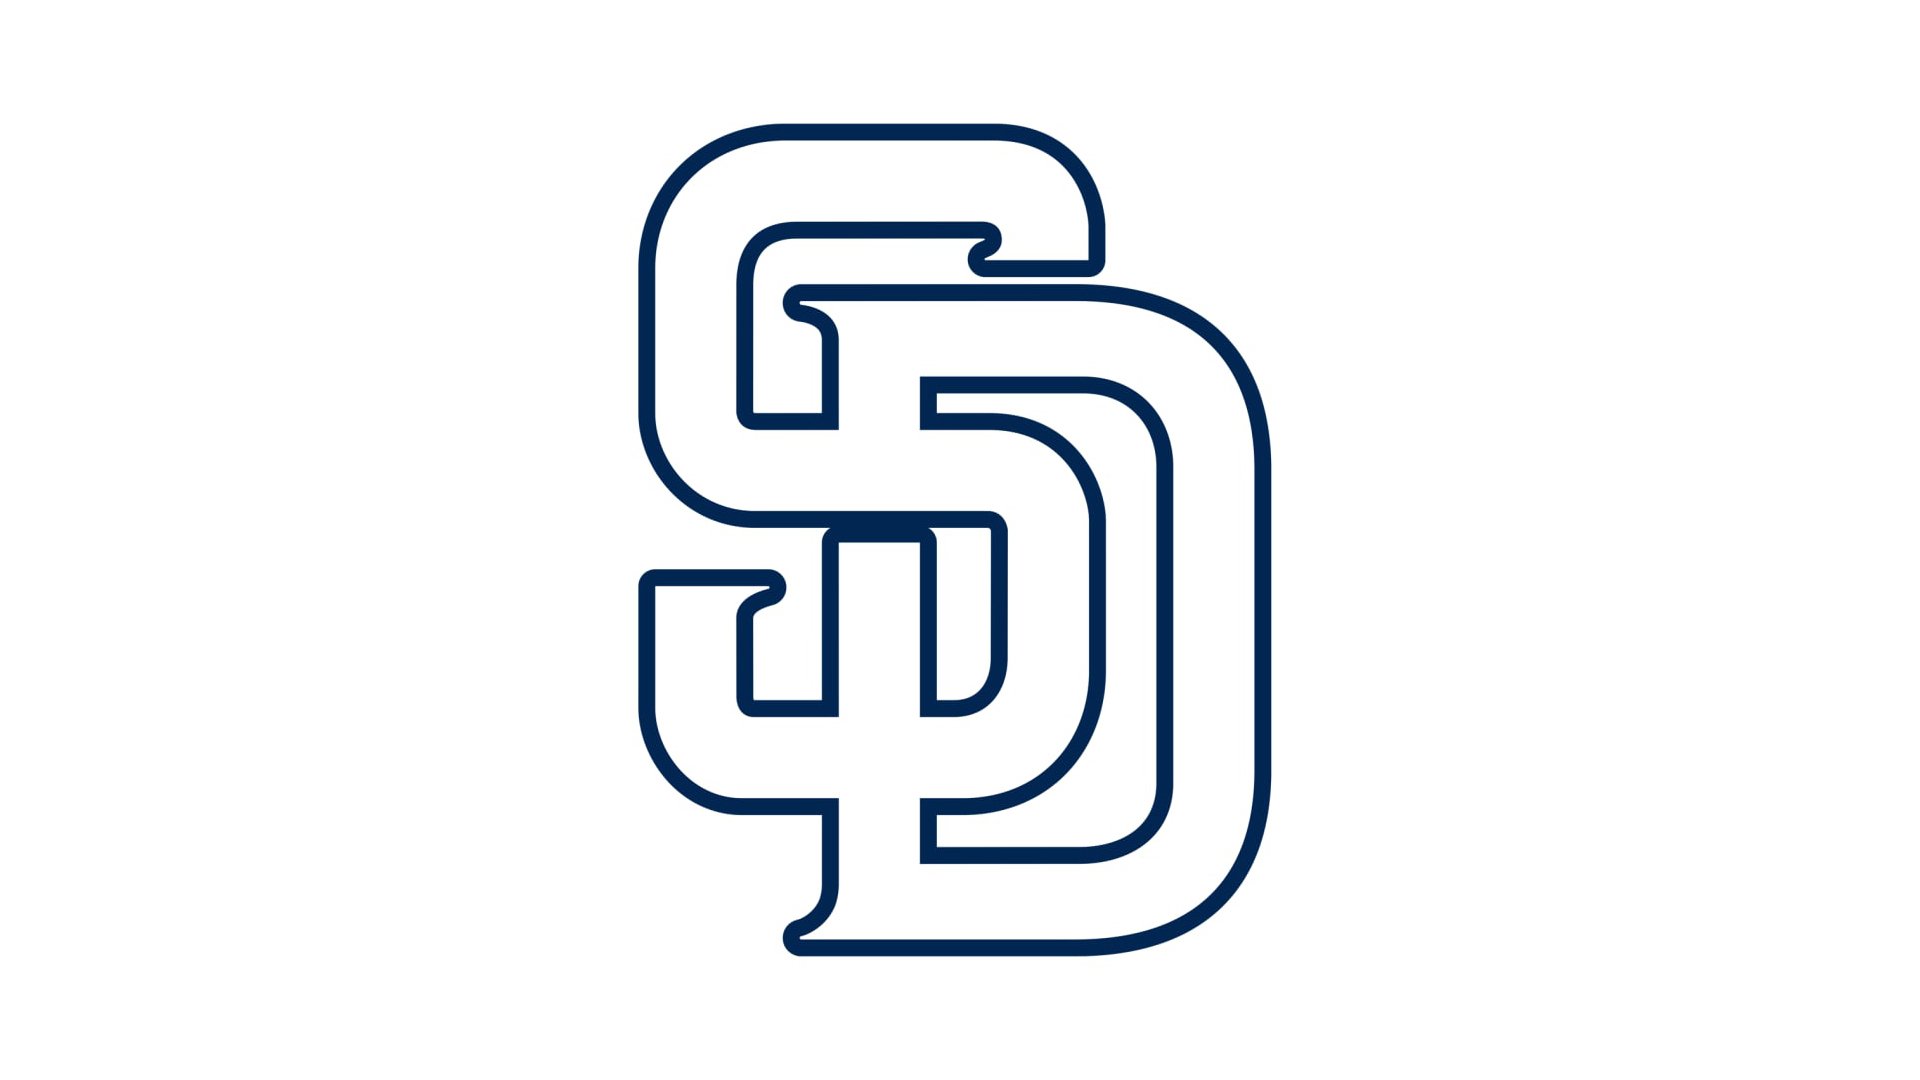 File:San Diego Padres logo 1986 to 1989.png - Wikipedia